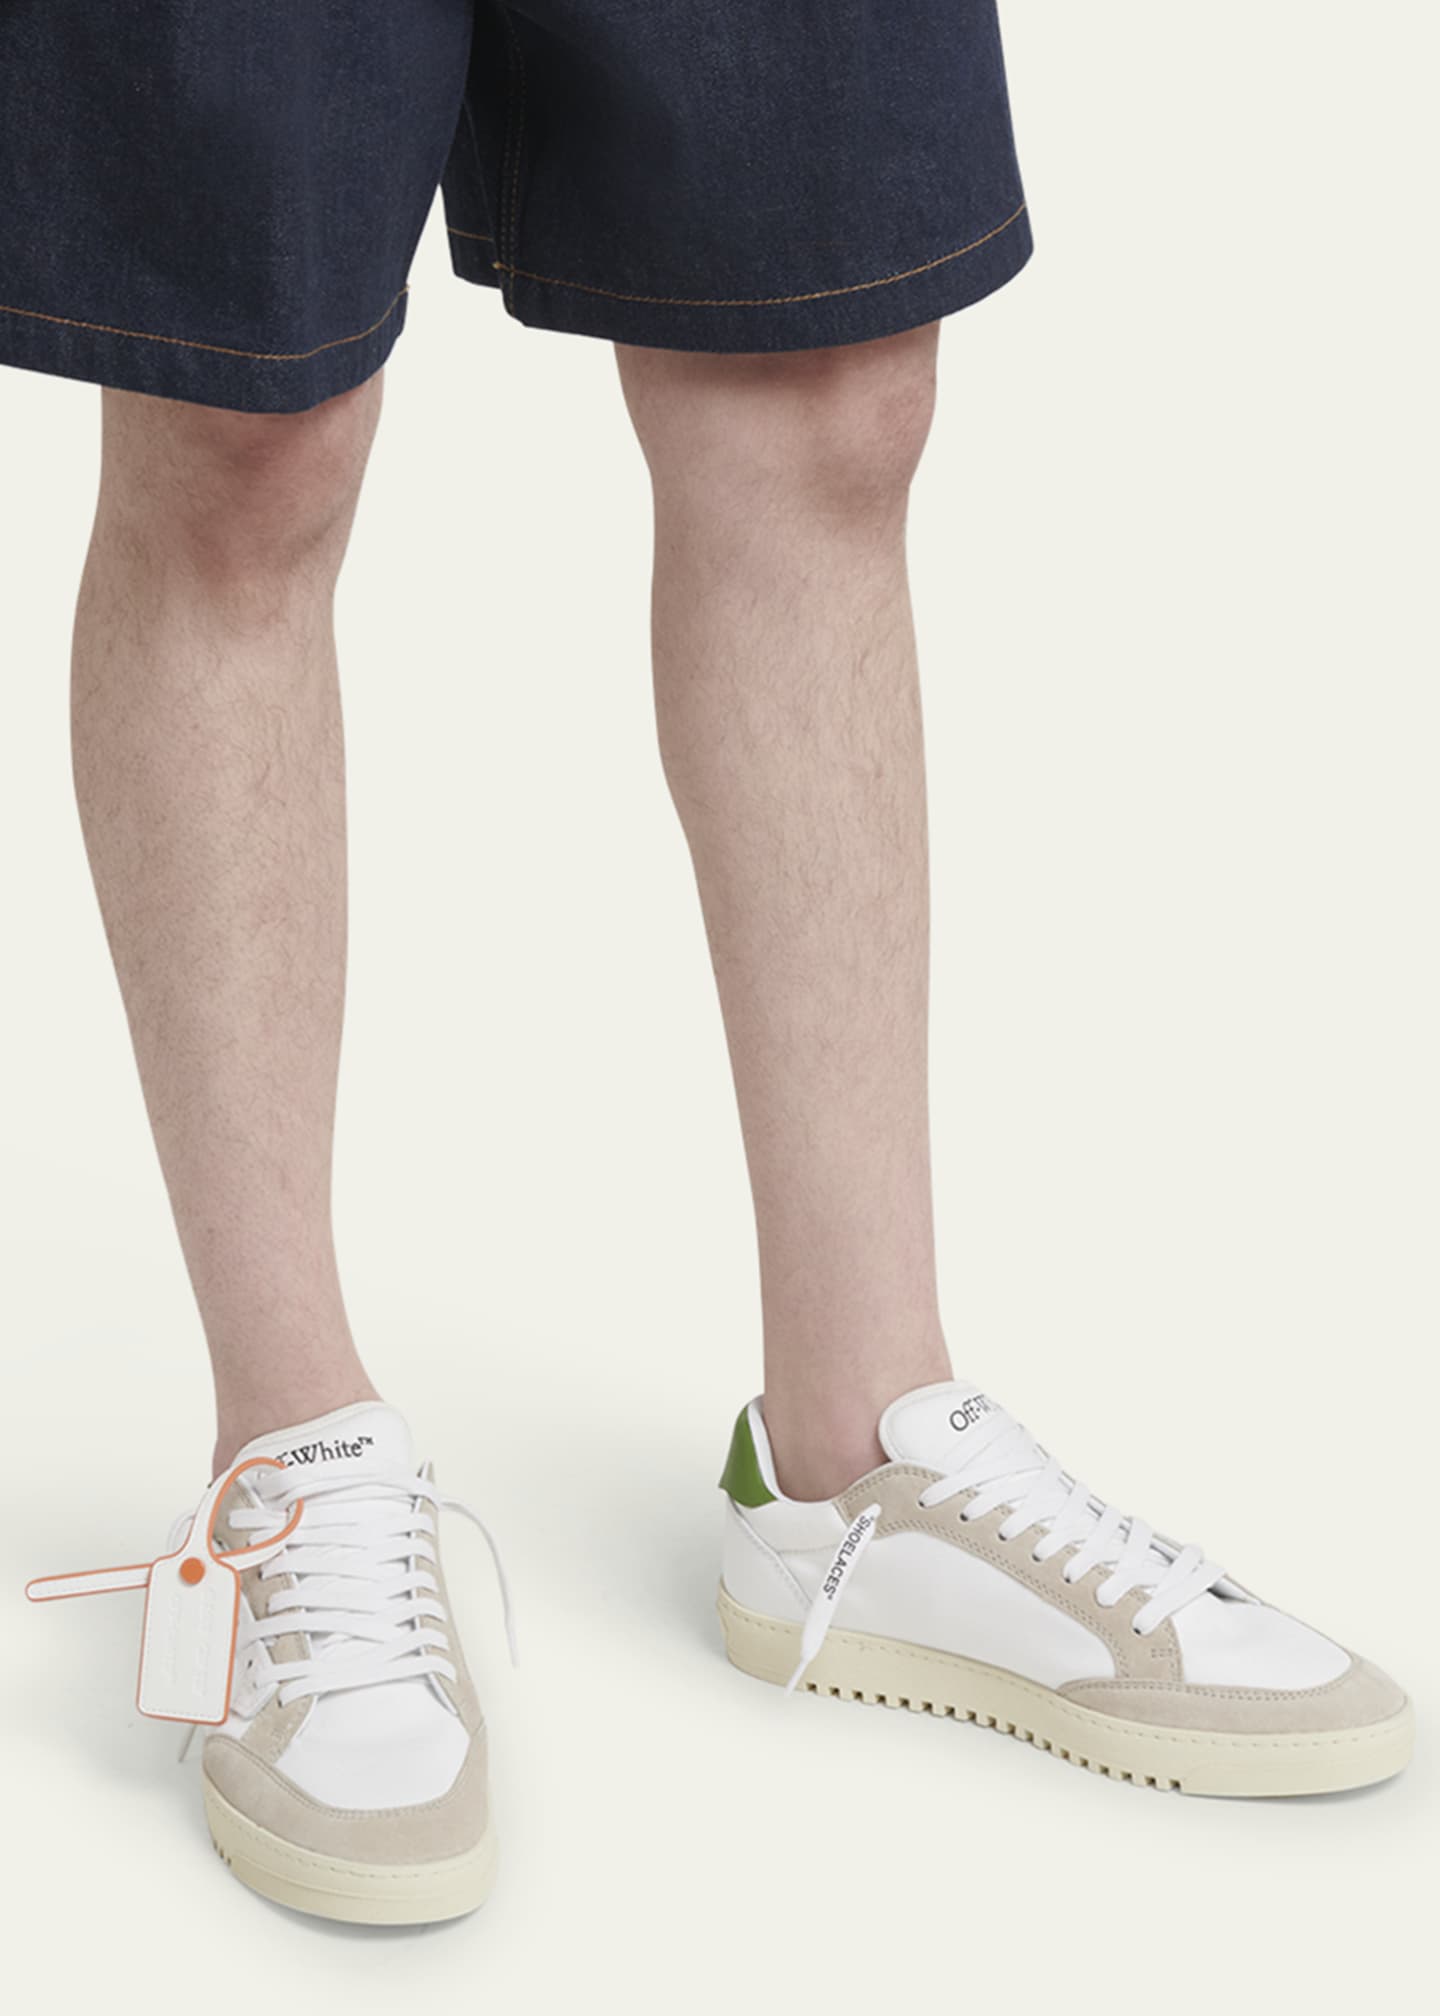 Off-White Men's 5.0 Canvas and Leather Low-Top Sneakers Image 2 of 5